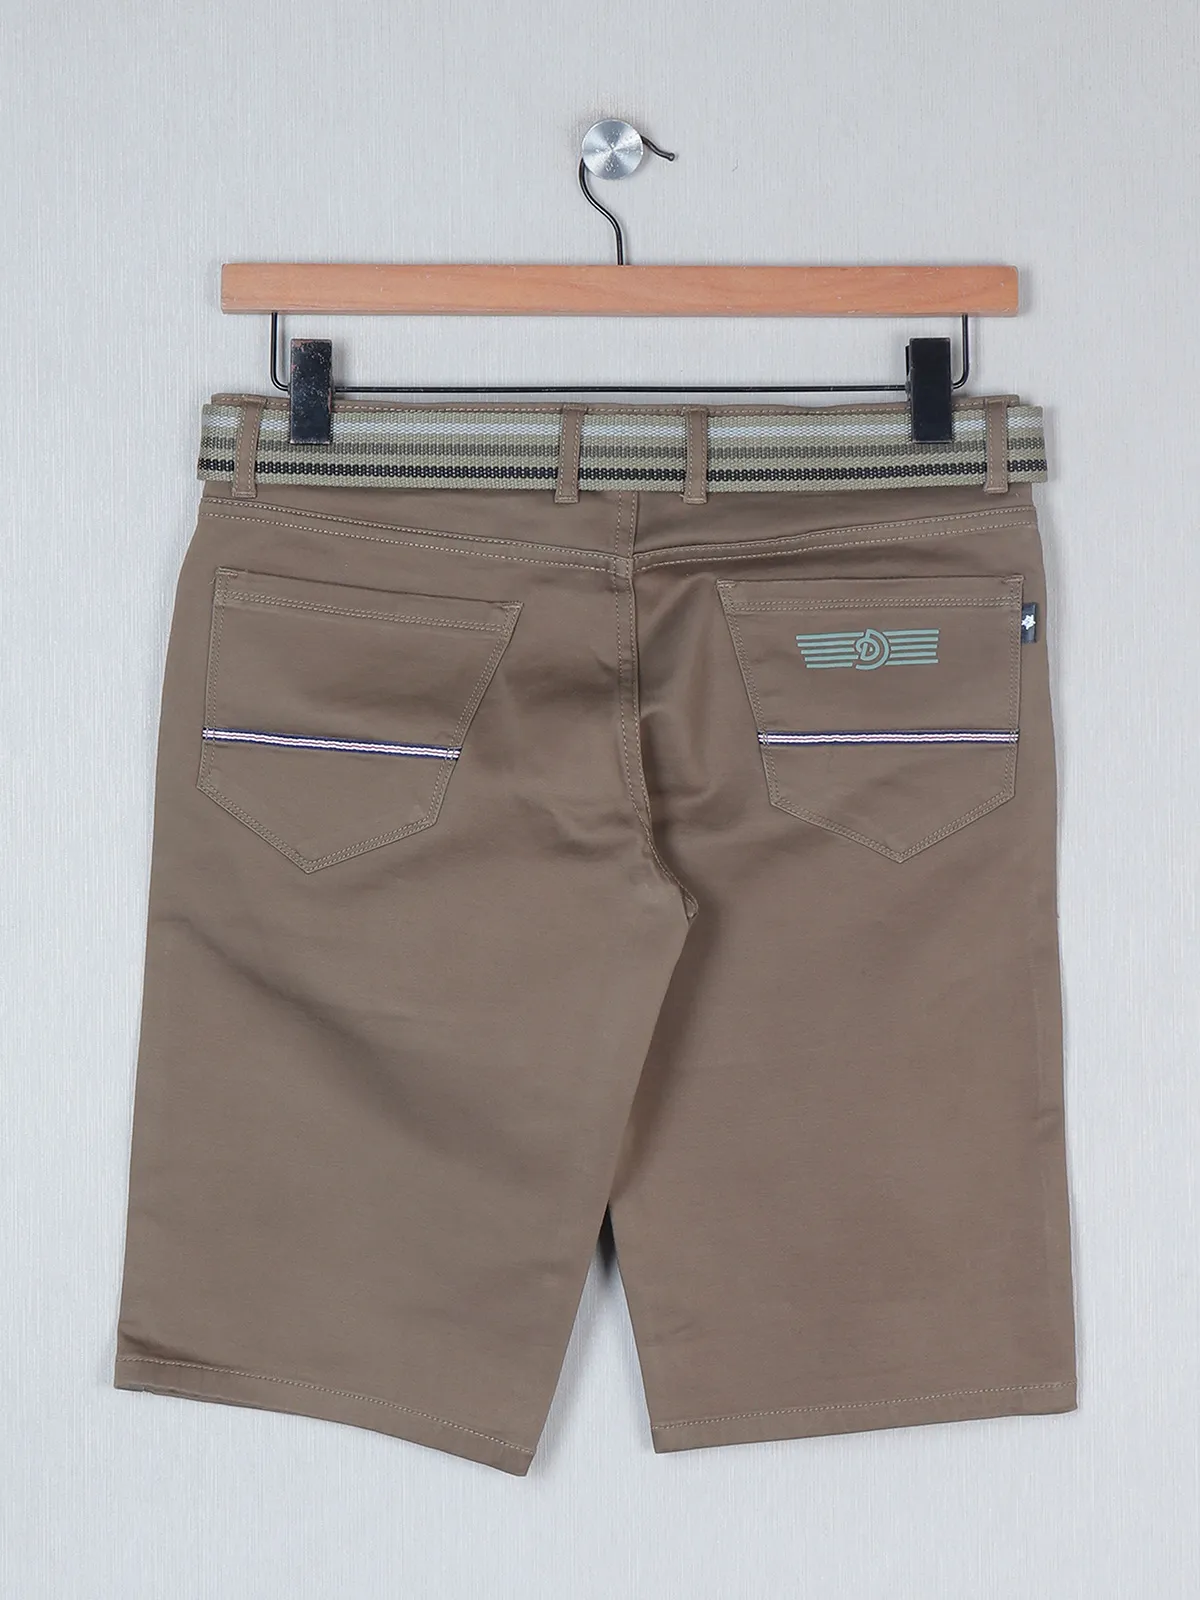 TYZ beige solid cotton mens casual shorts